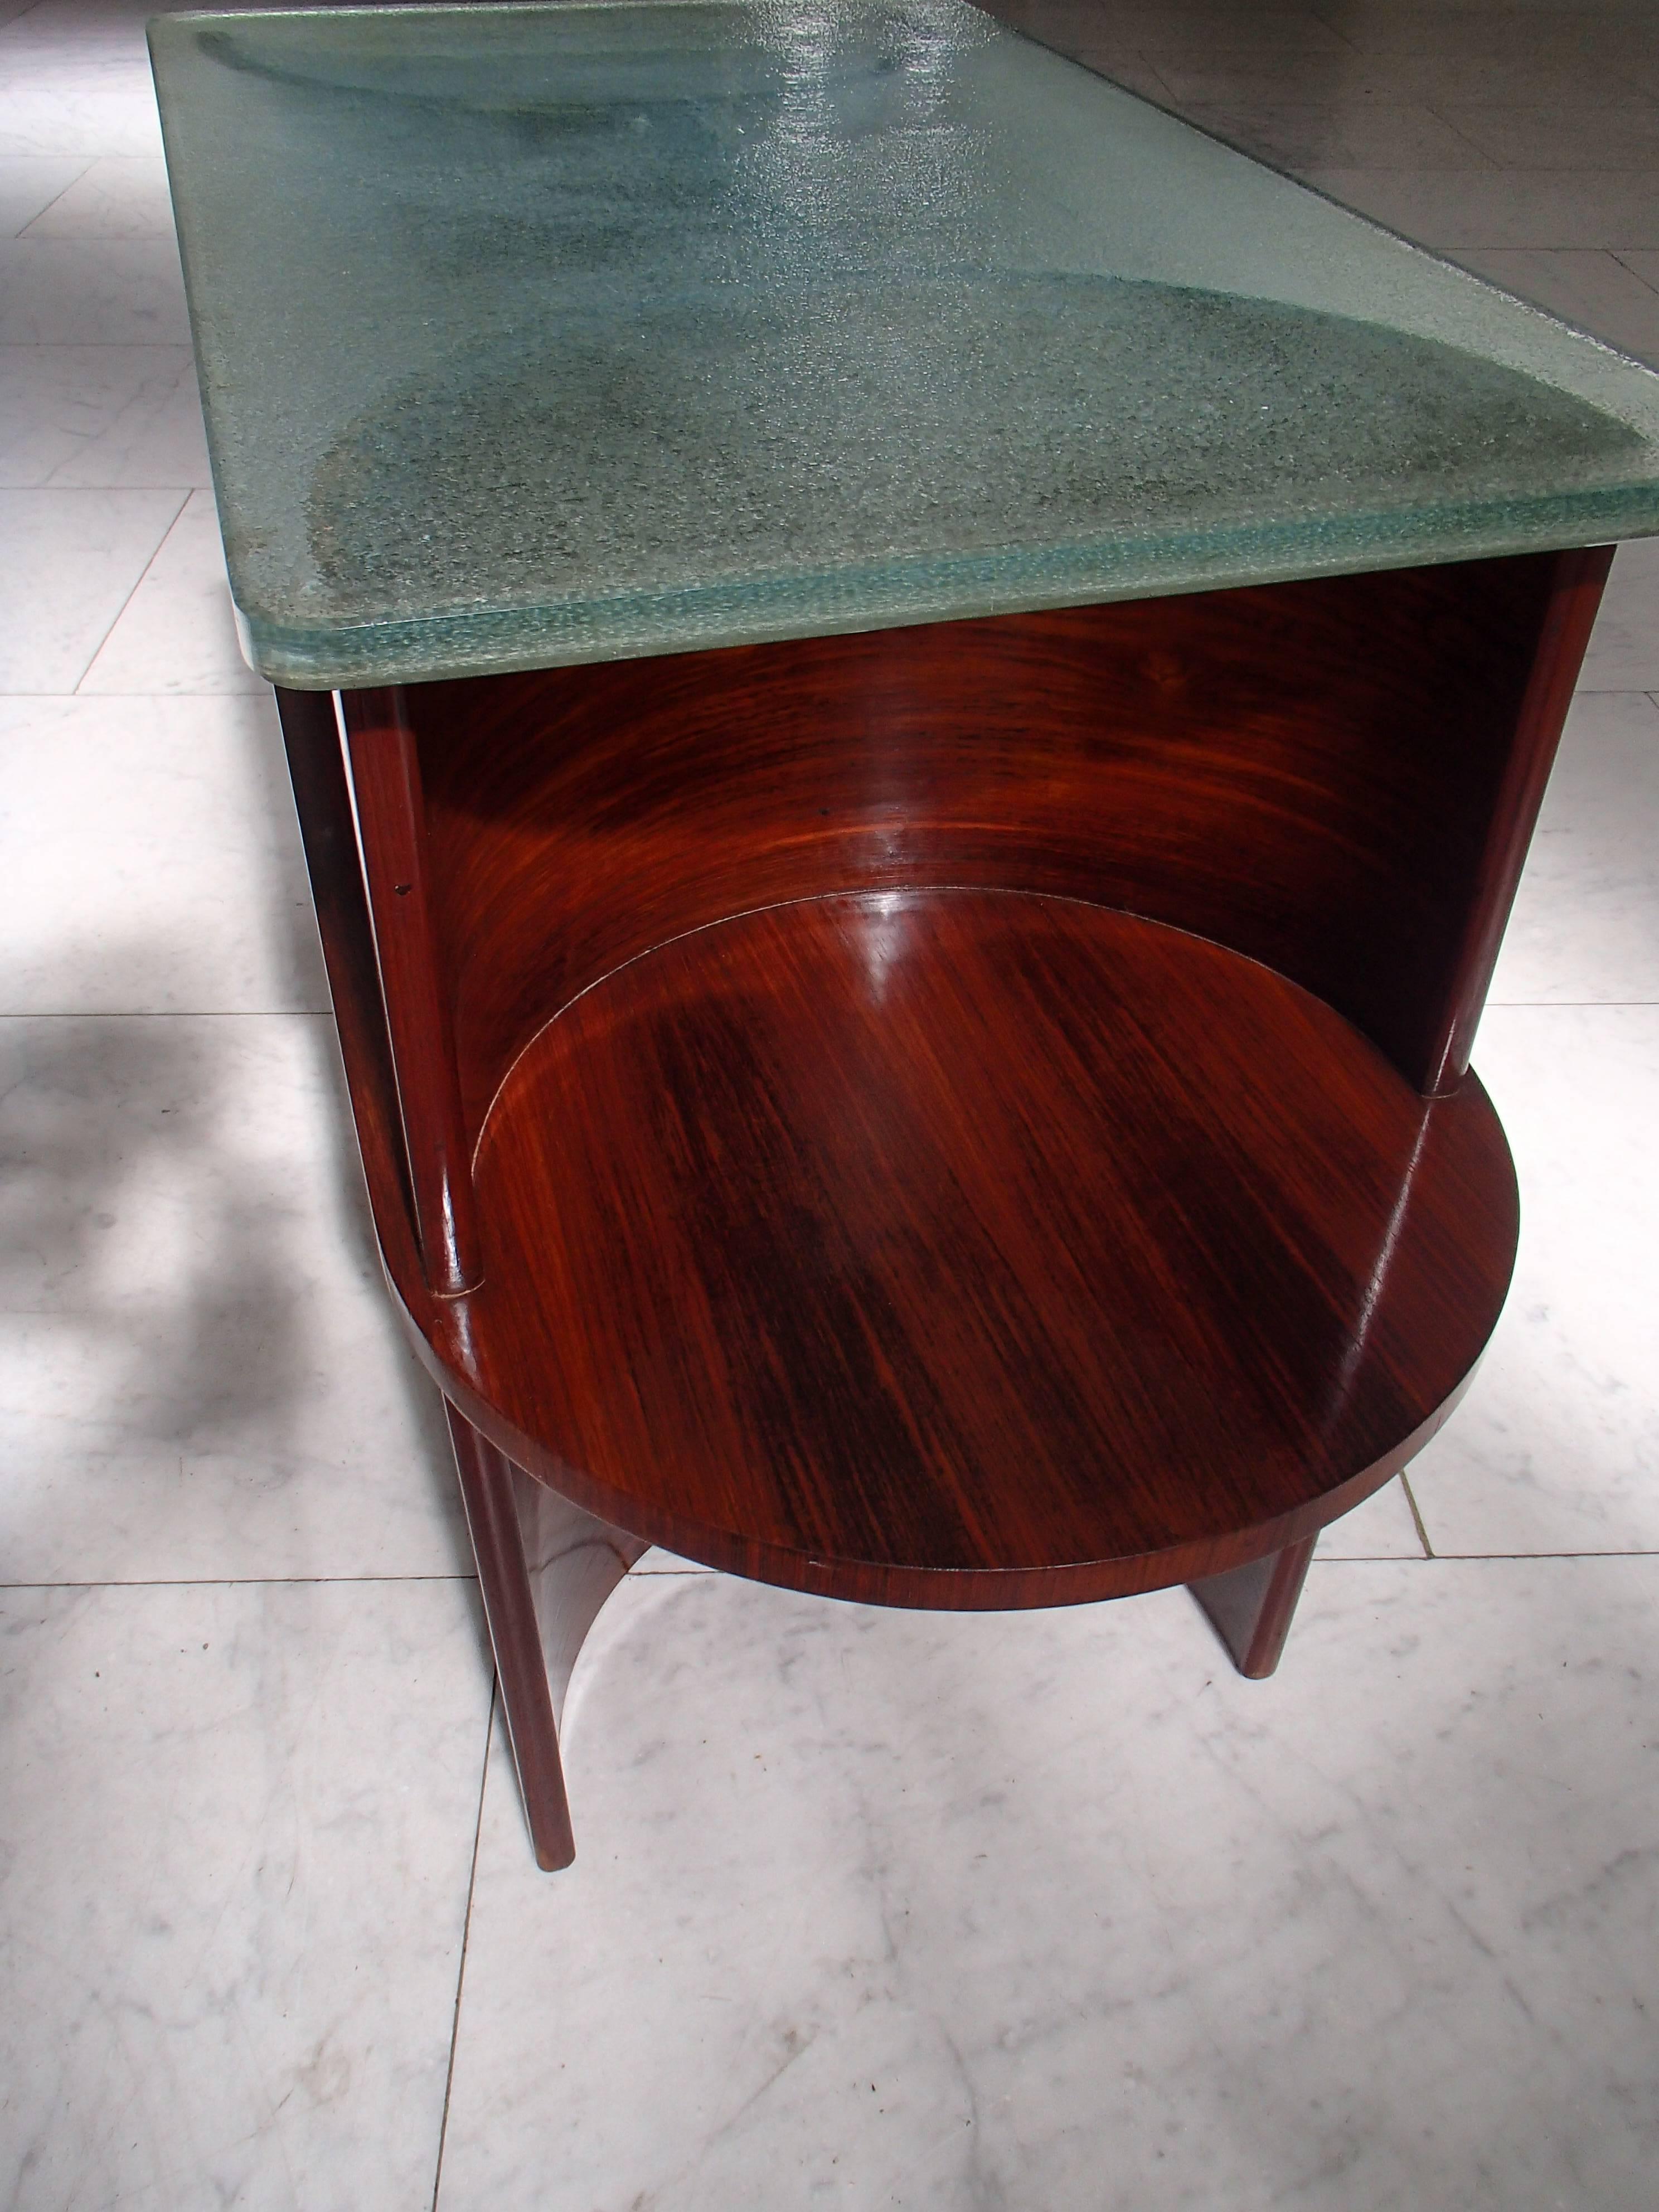 Varnished 1930 Cubist Modernistic Console Table Rosewood and Thick Glass Top For Sale